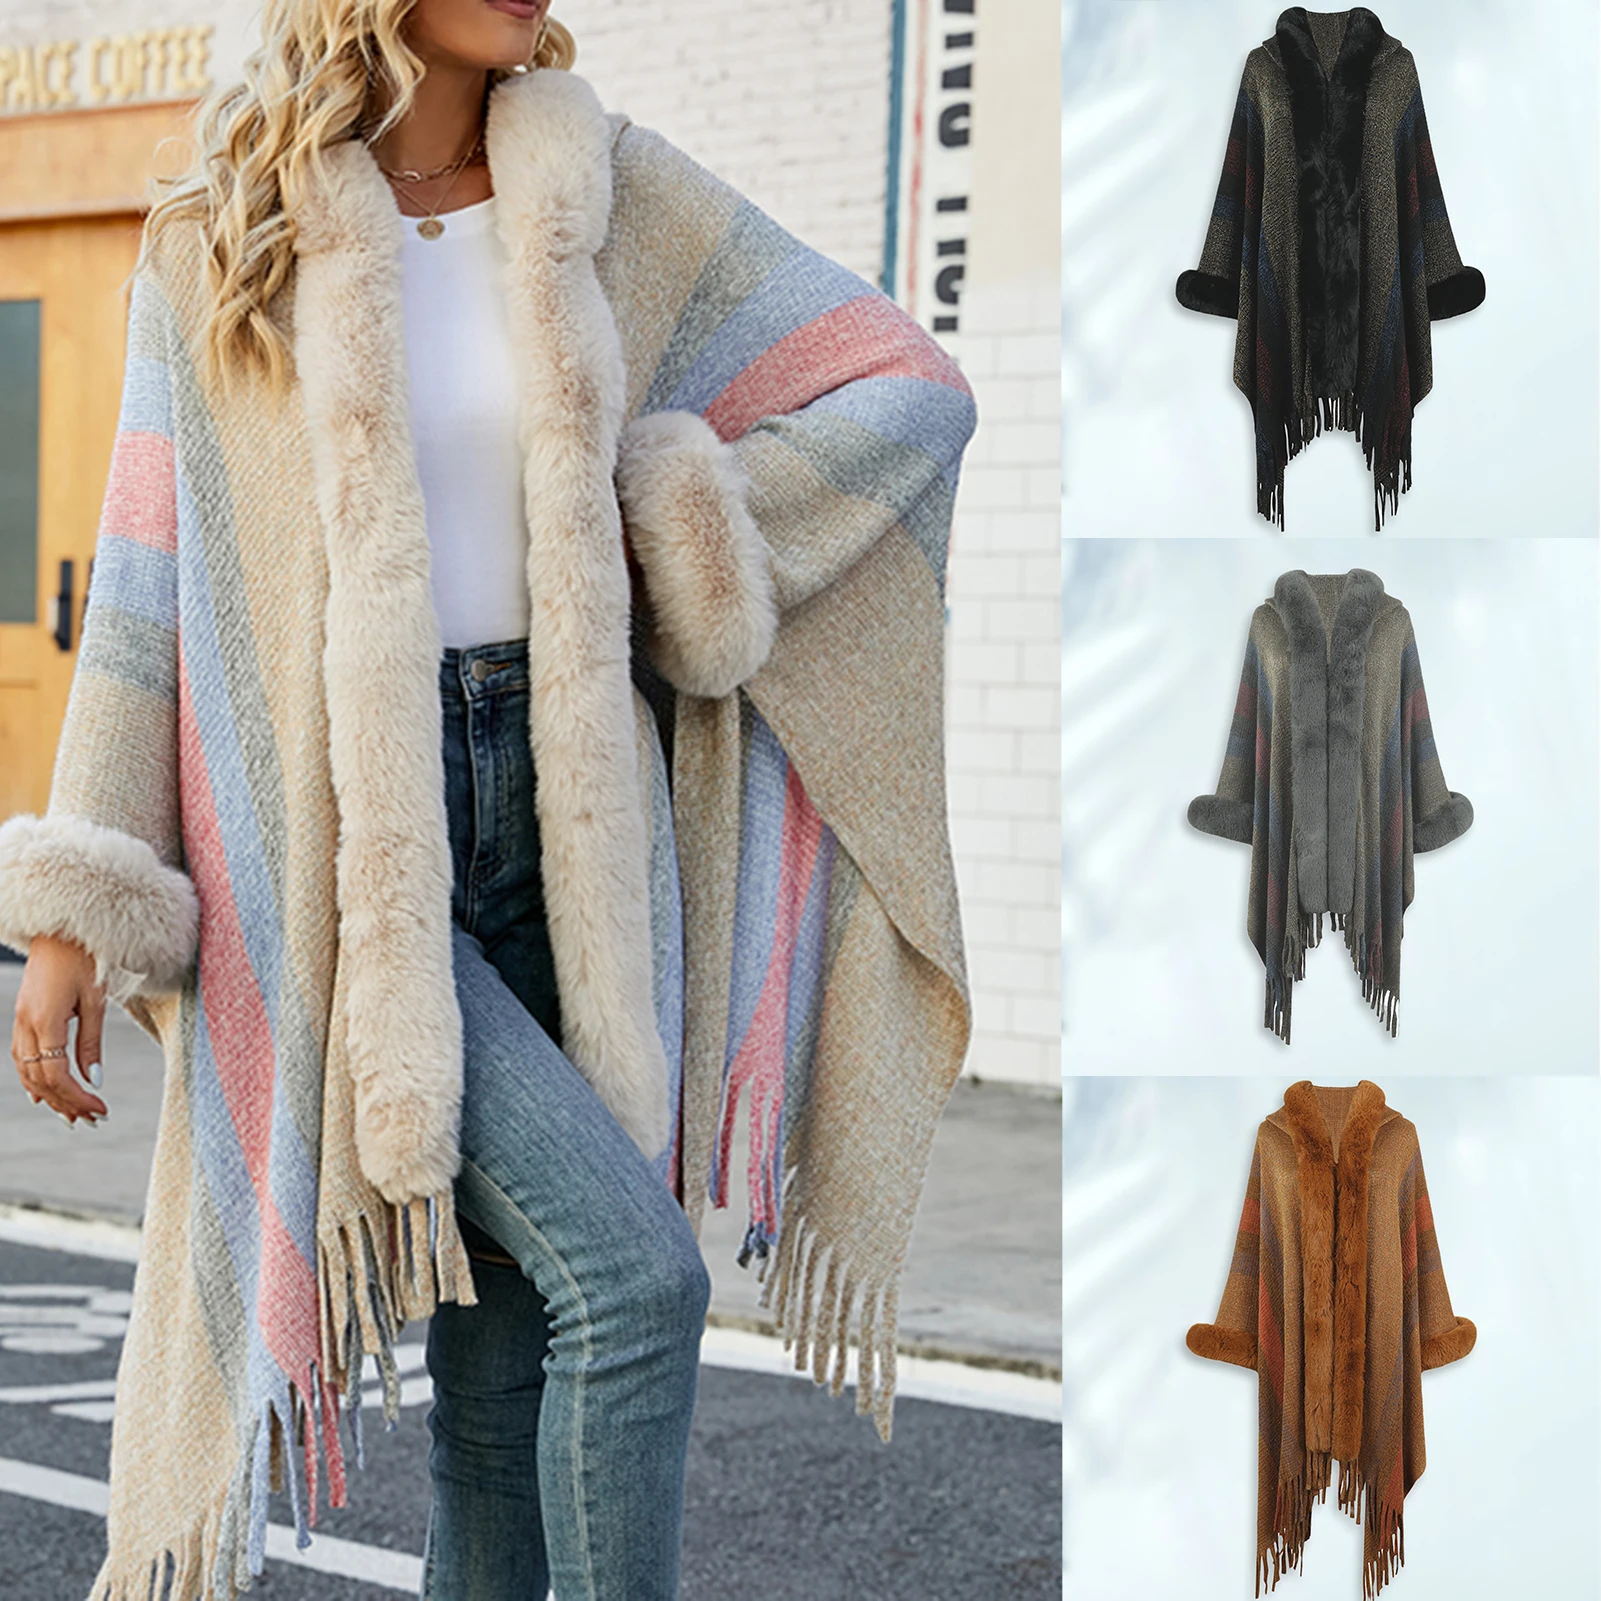 

Winter Tassel Solid Color Hooded Shawl Knitted Cardigans Women Poncho Autumn Winter Clothing Batwing Sleeve Sweater Cape Coats